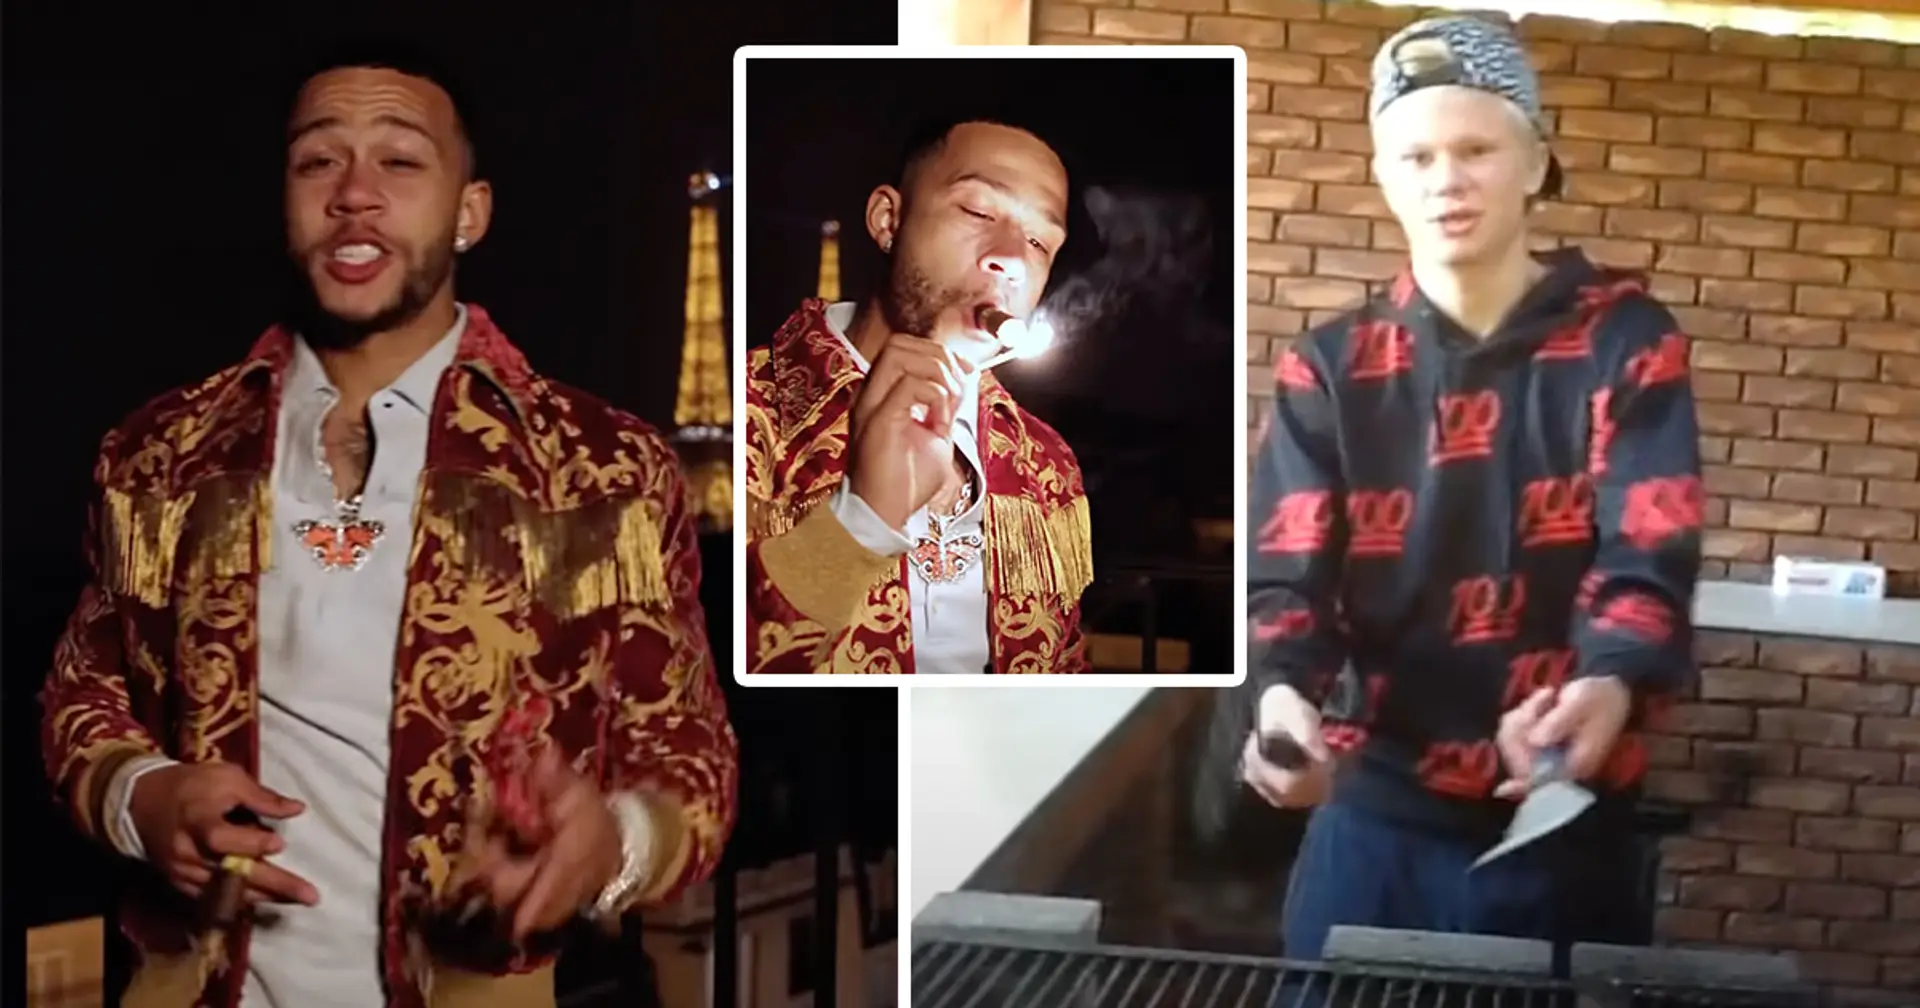 7 football stars who have also made rap music from Depay to Haaland